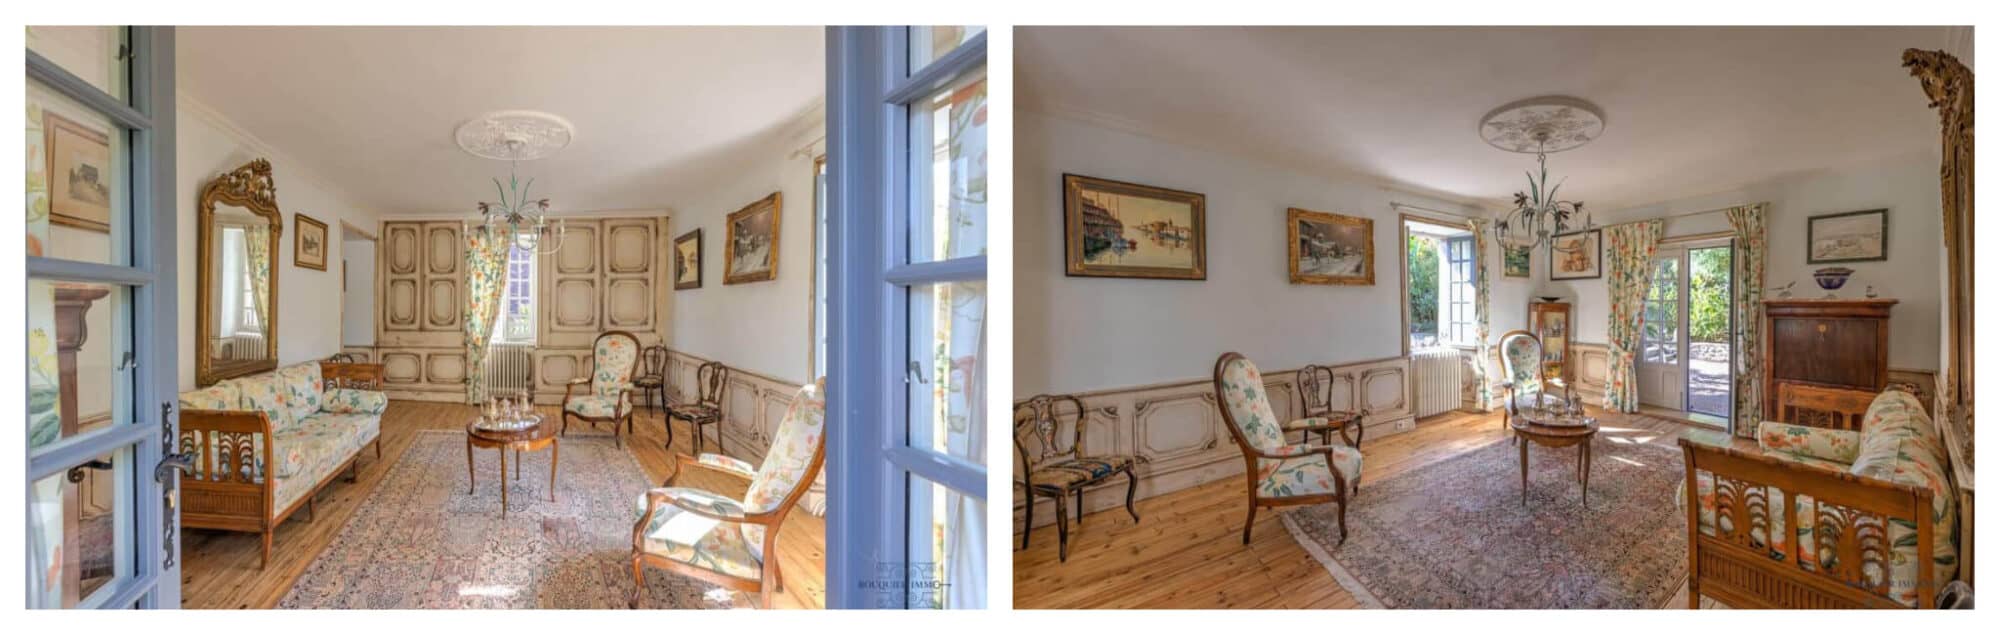 Left: A large living room of a house for sale in Dordogne, France, decorated with floral chairs and Persian carpets; Left: The same living room can be seen with a French door leading to an exterior garden.